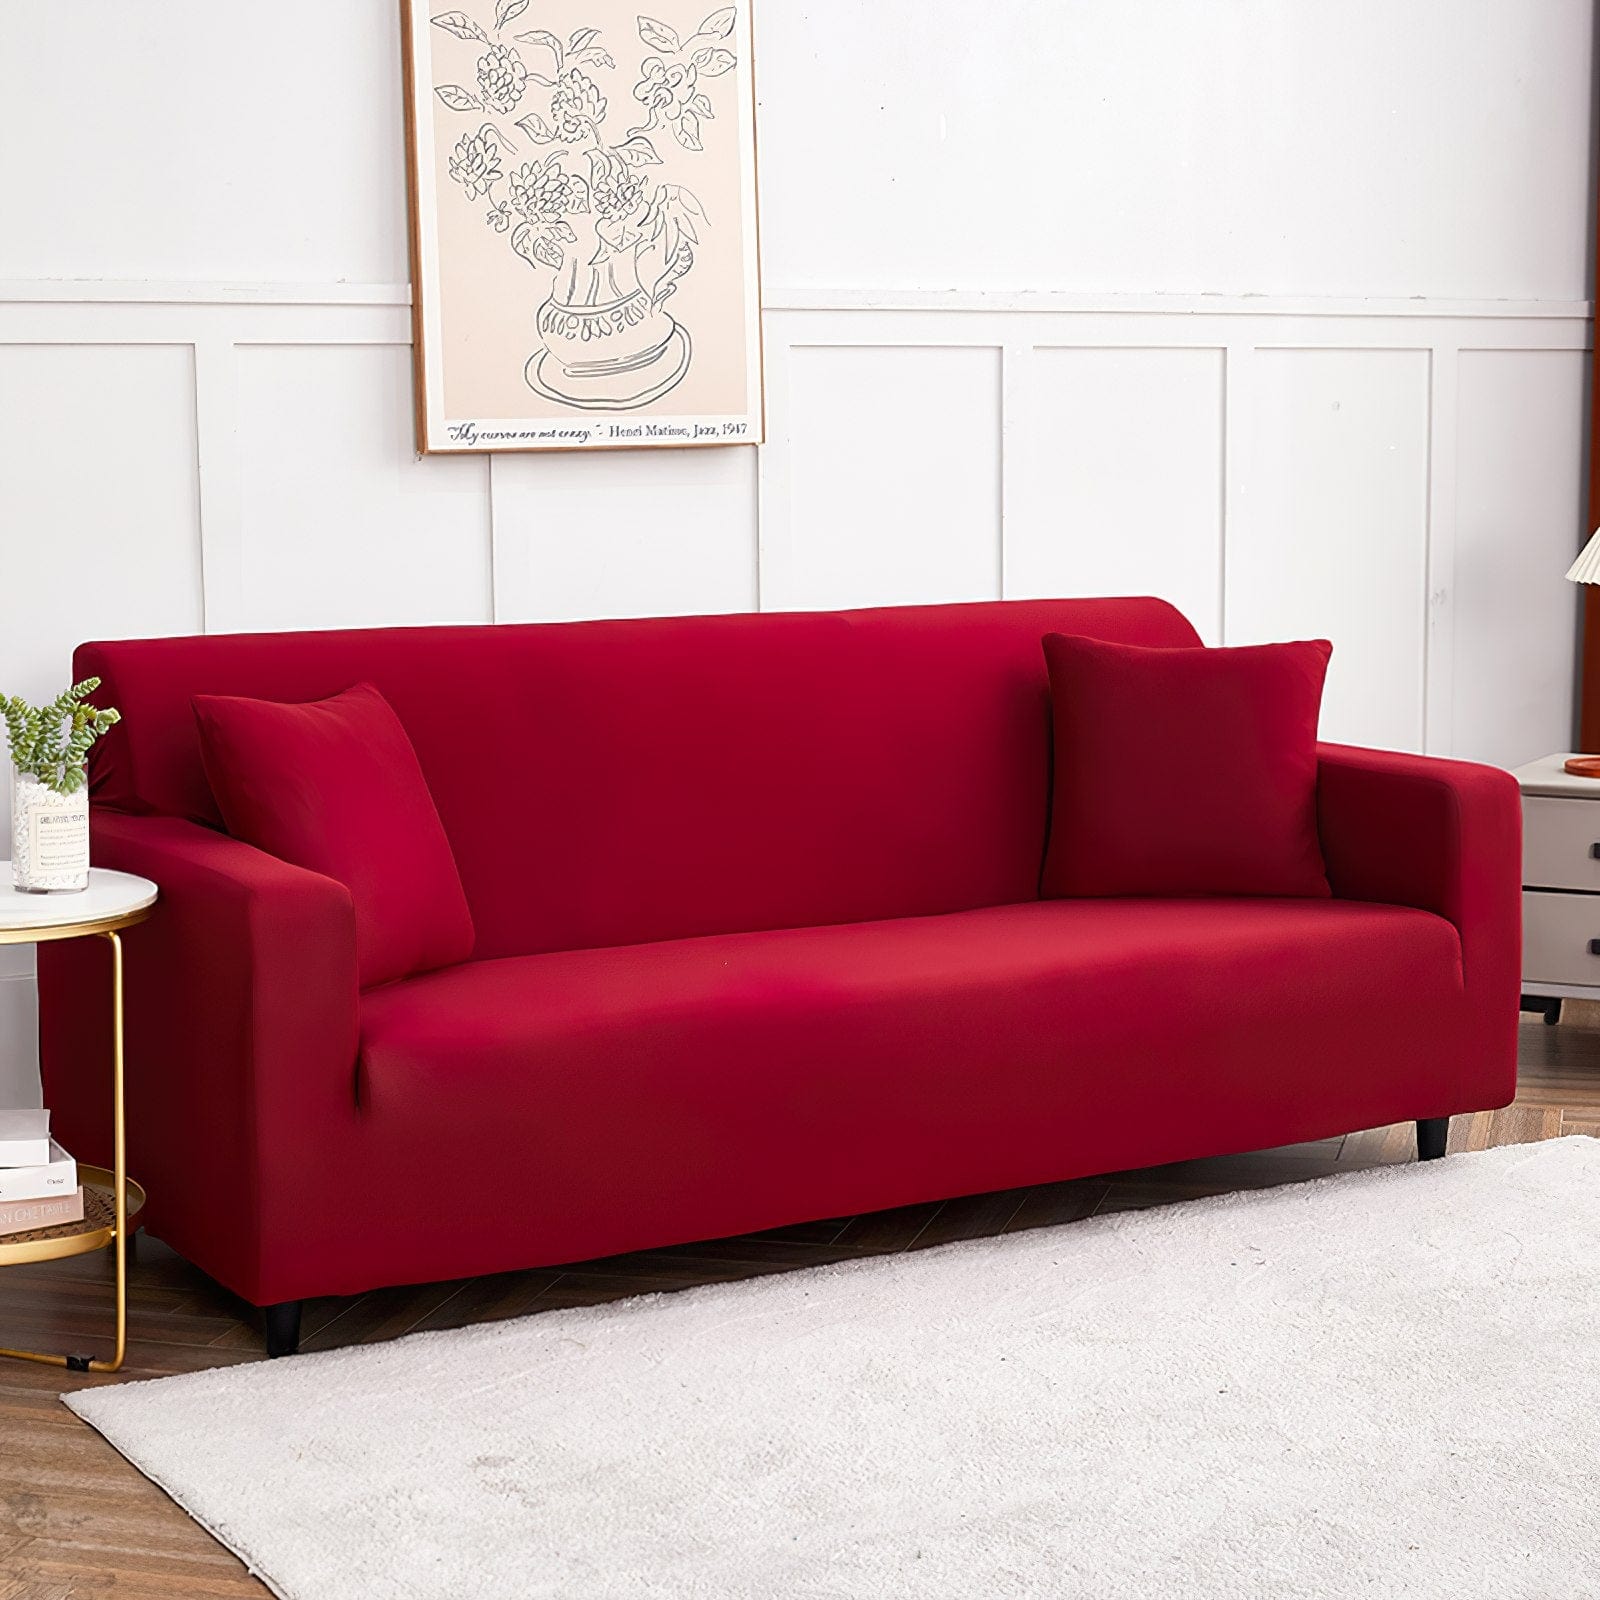 Red wine - Extendable Armchair and Sofa Covers - The Sofa Cover House